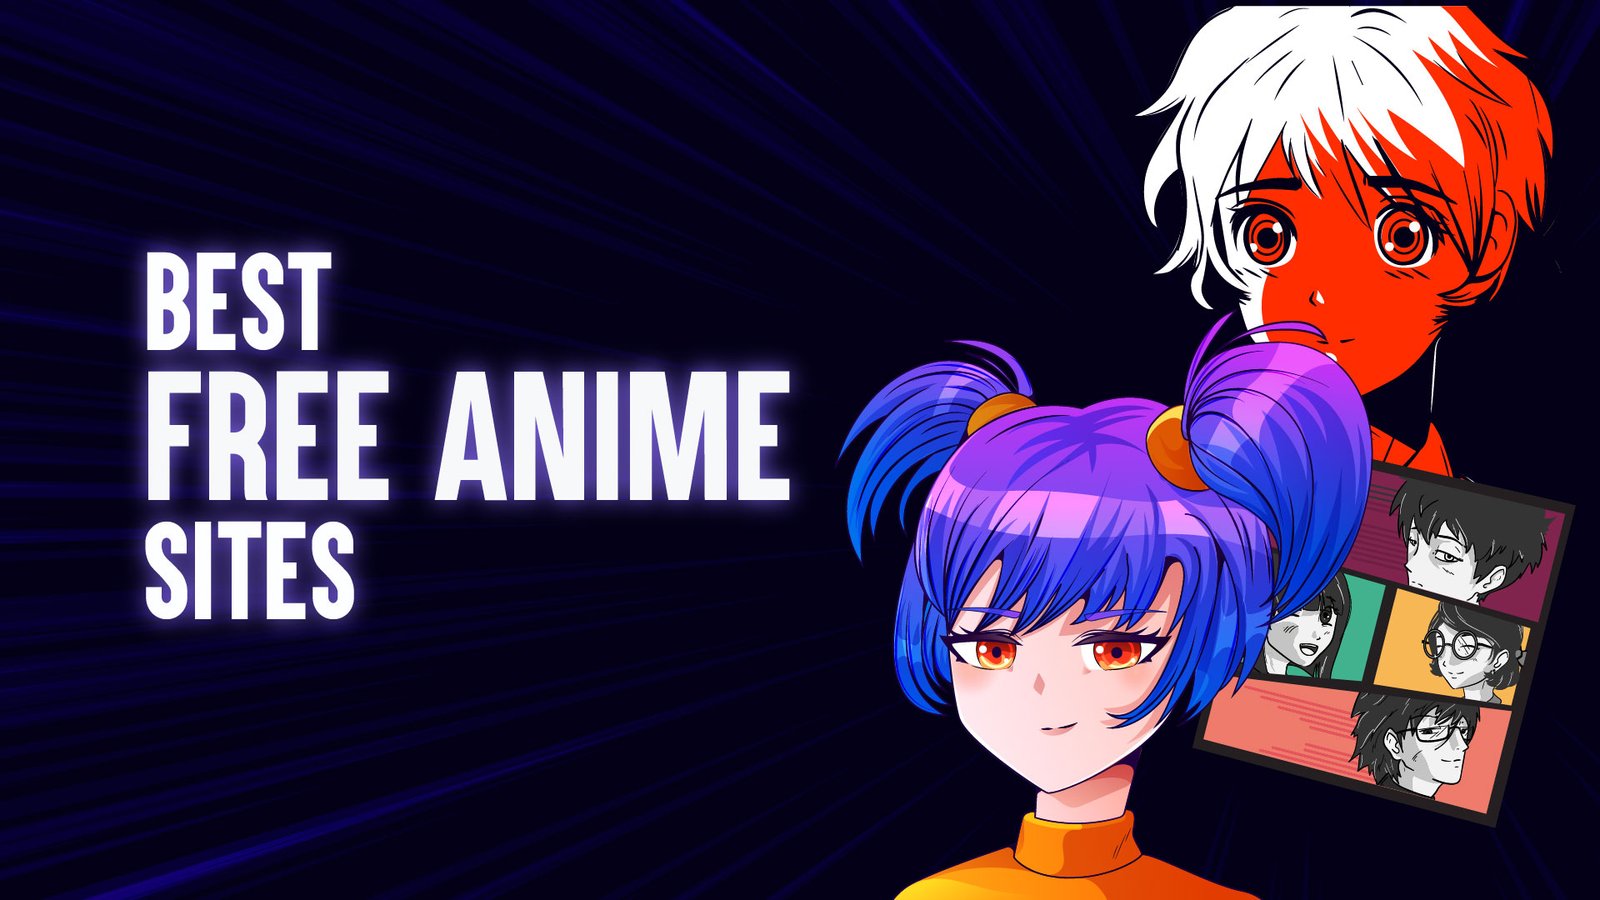 10+ Best Free Anime Sites 2023: According To Anime Experts